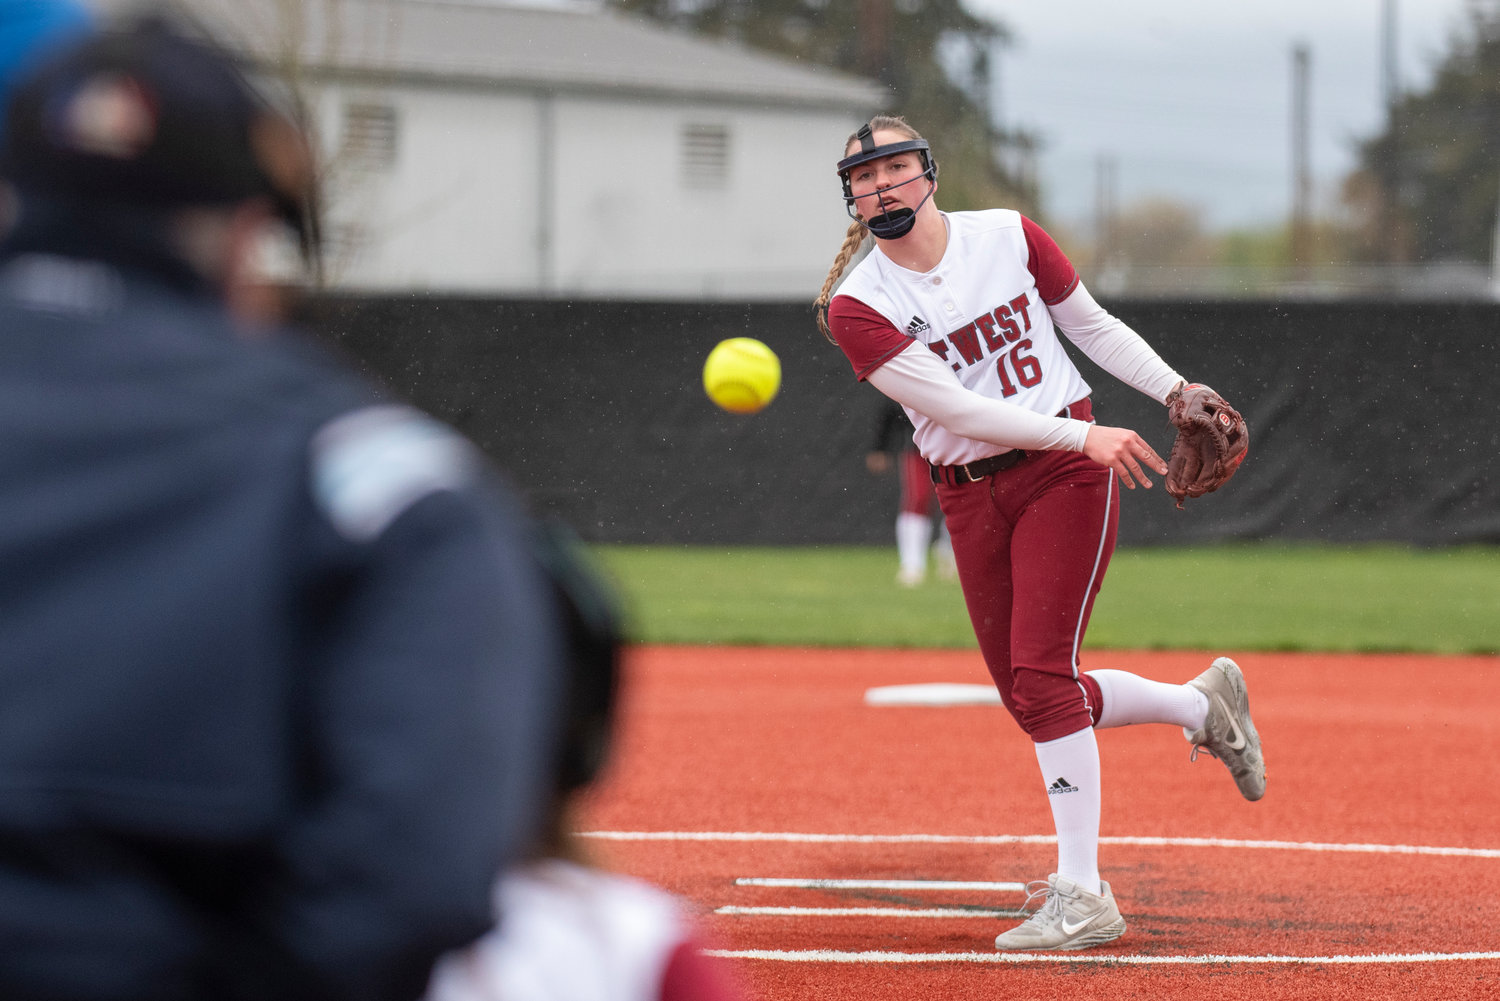 W.F. West pitcher Kamy Dacus delivers a pitch to a Rochester batter during a league home game at the Chehalis Sports Complex on Wednesday.